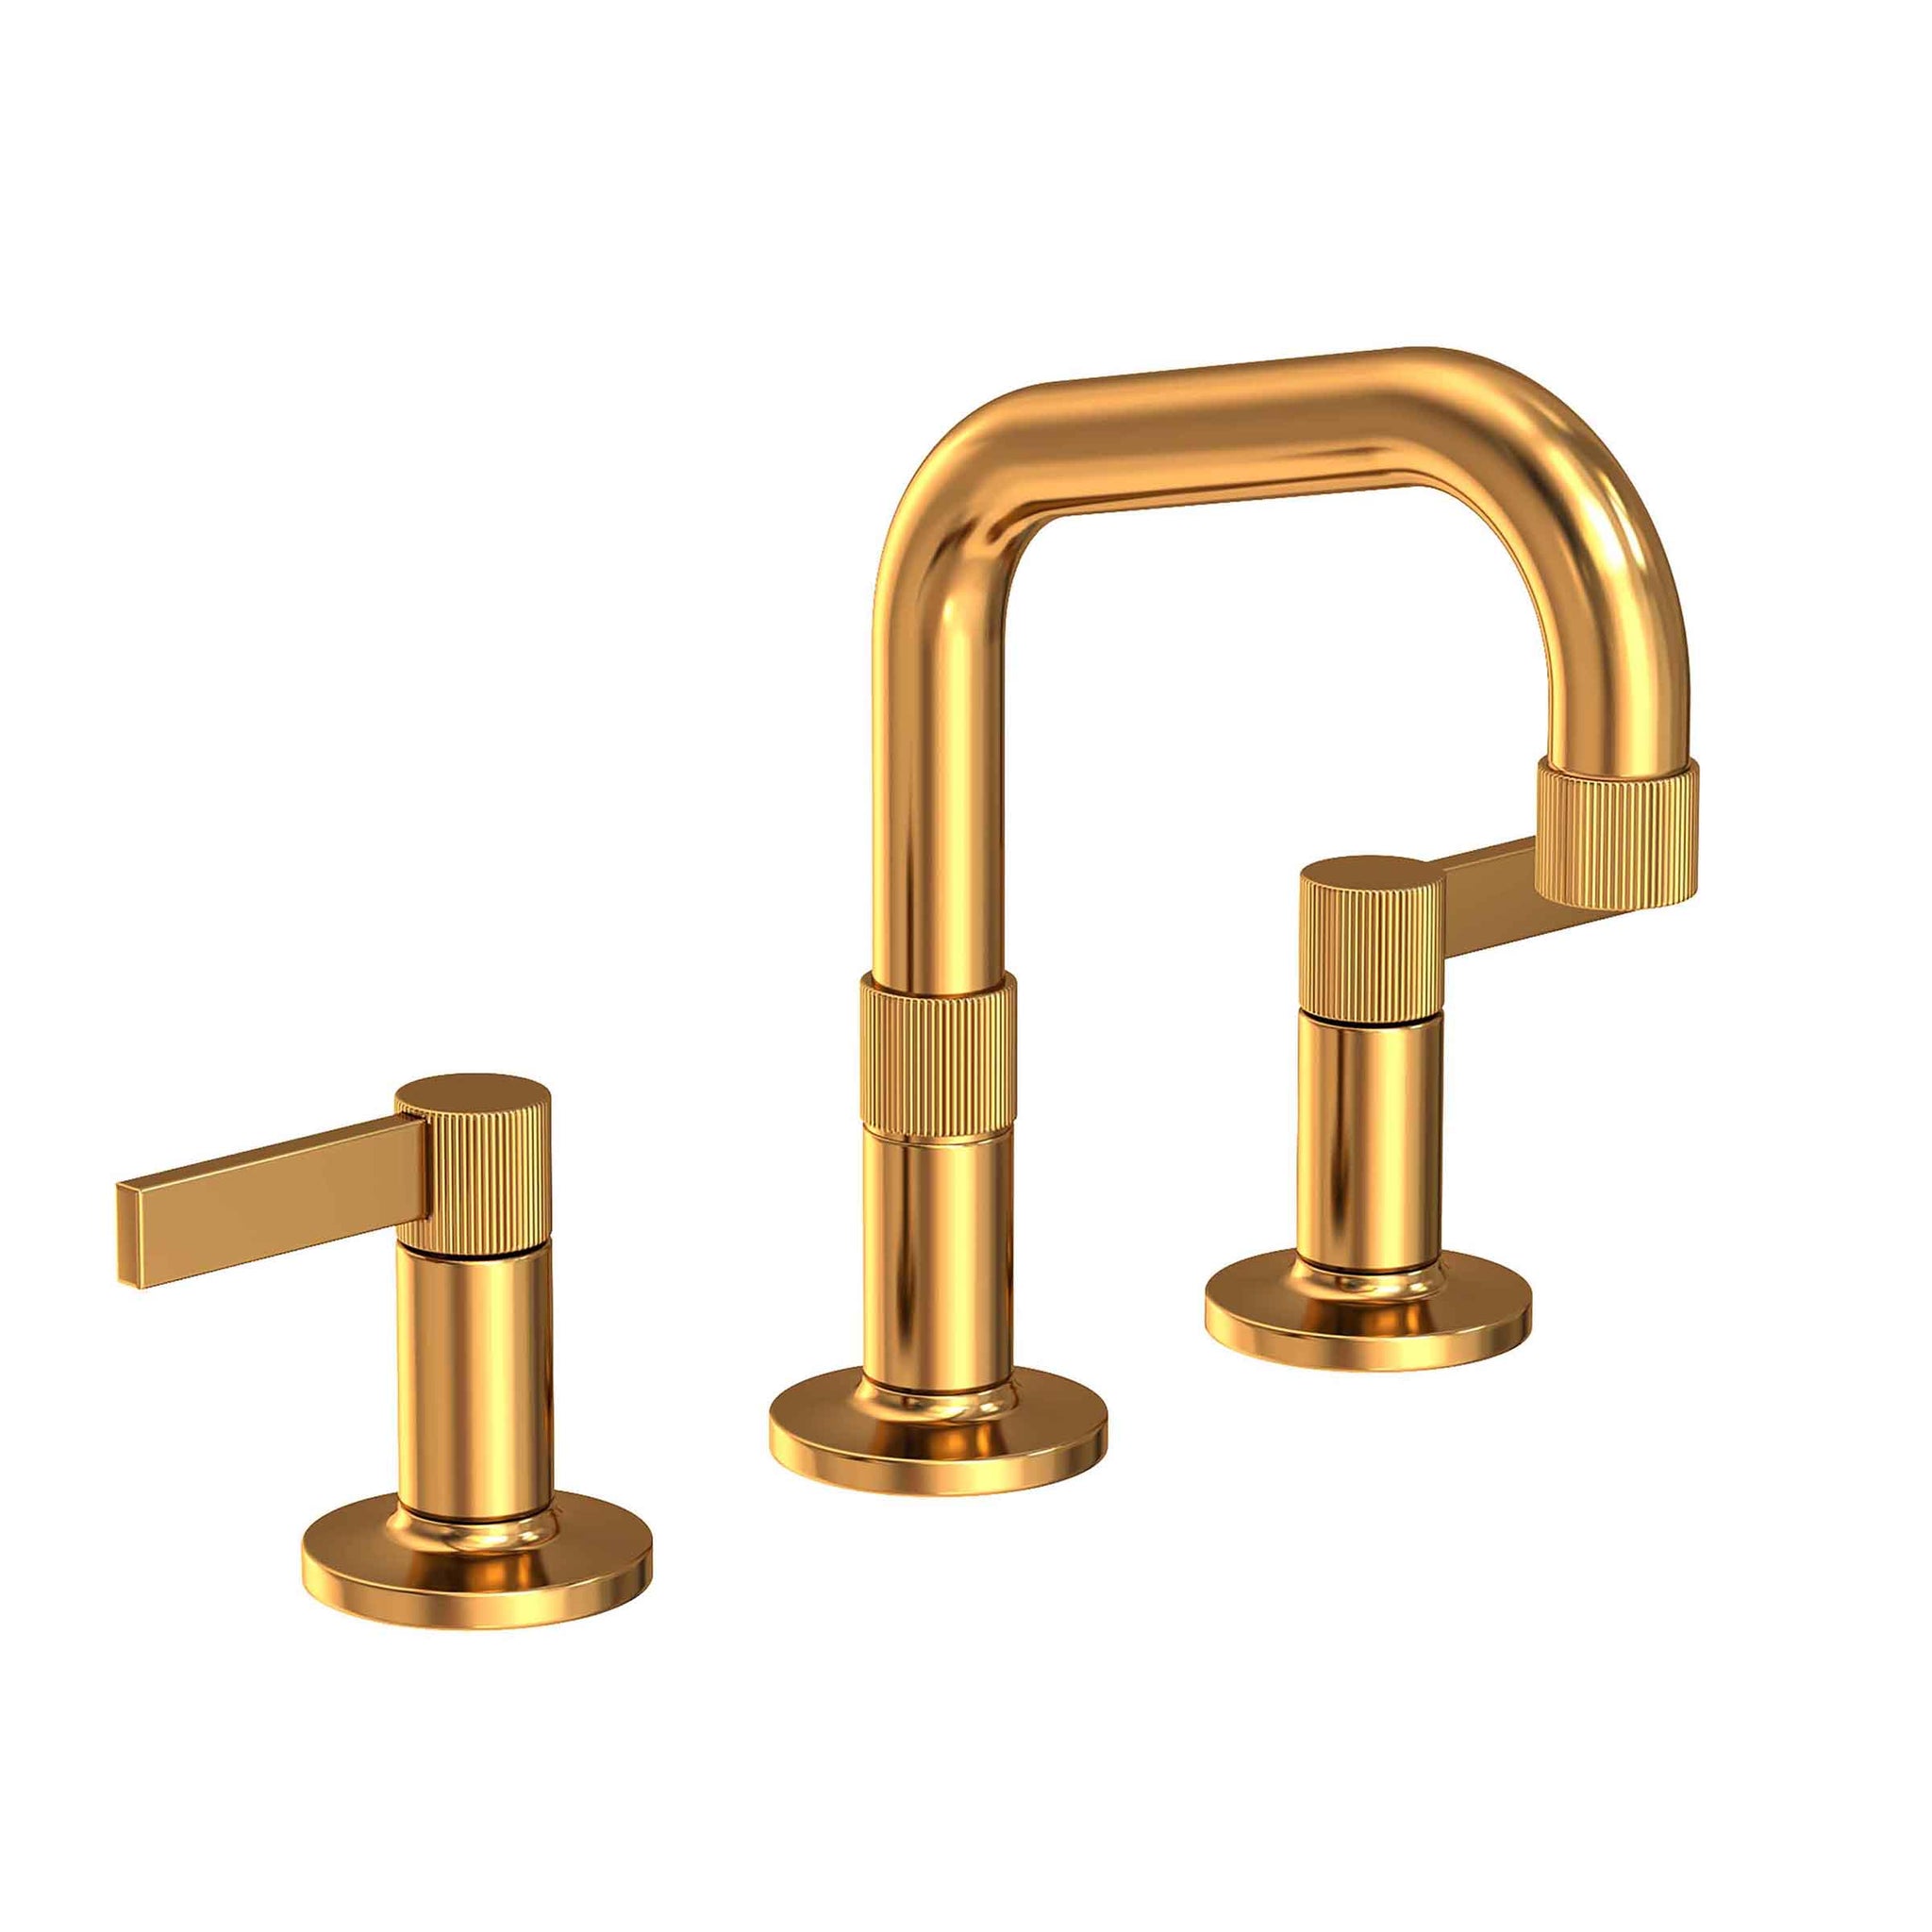 Newport Brass Products  Newport Brass Faucets, Parts, and Accessories